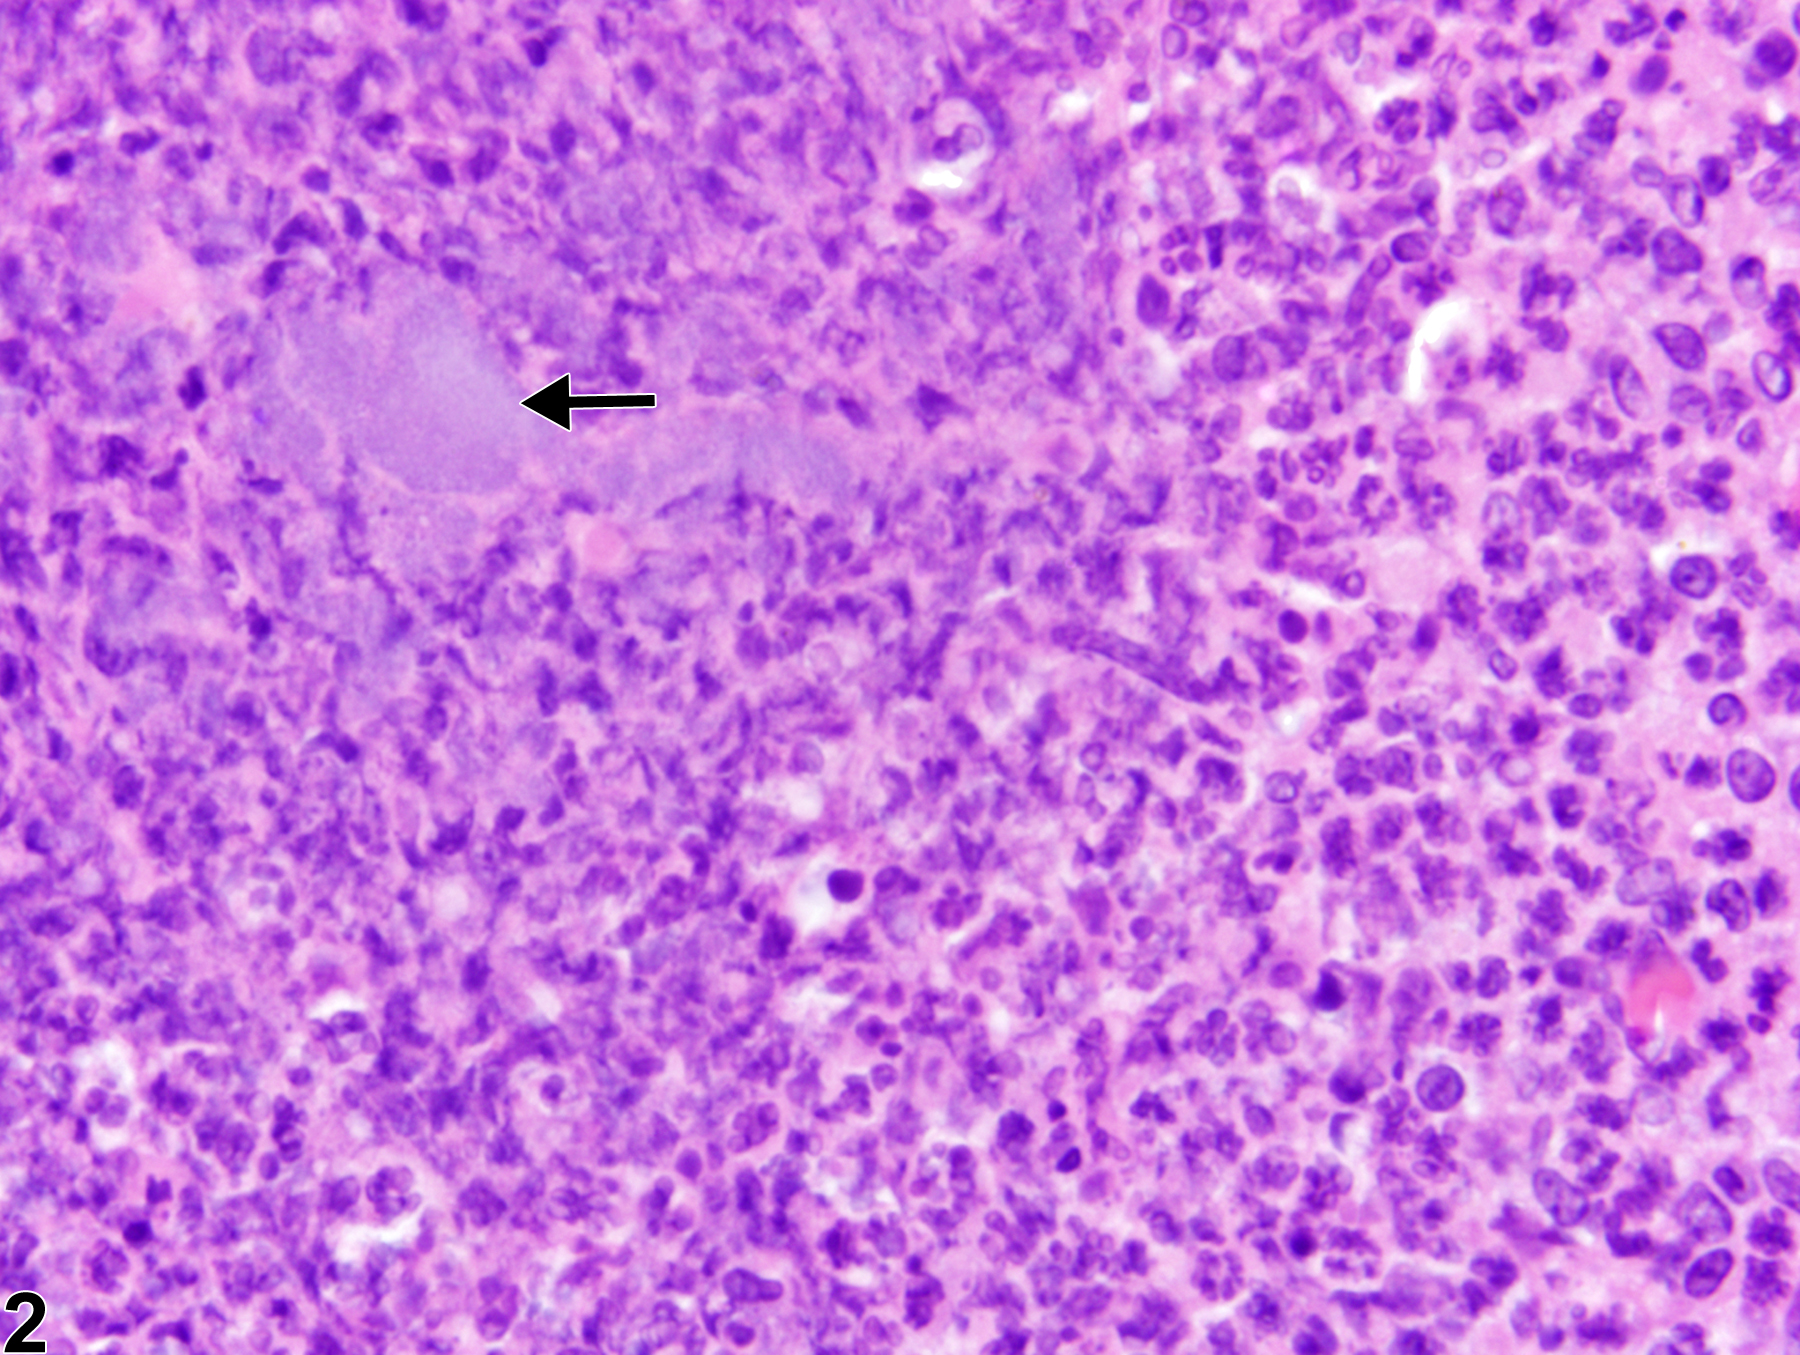 Image of inflammation in the thymus from a female B6C3F1/N mouse in a chronic study